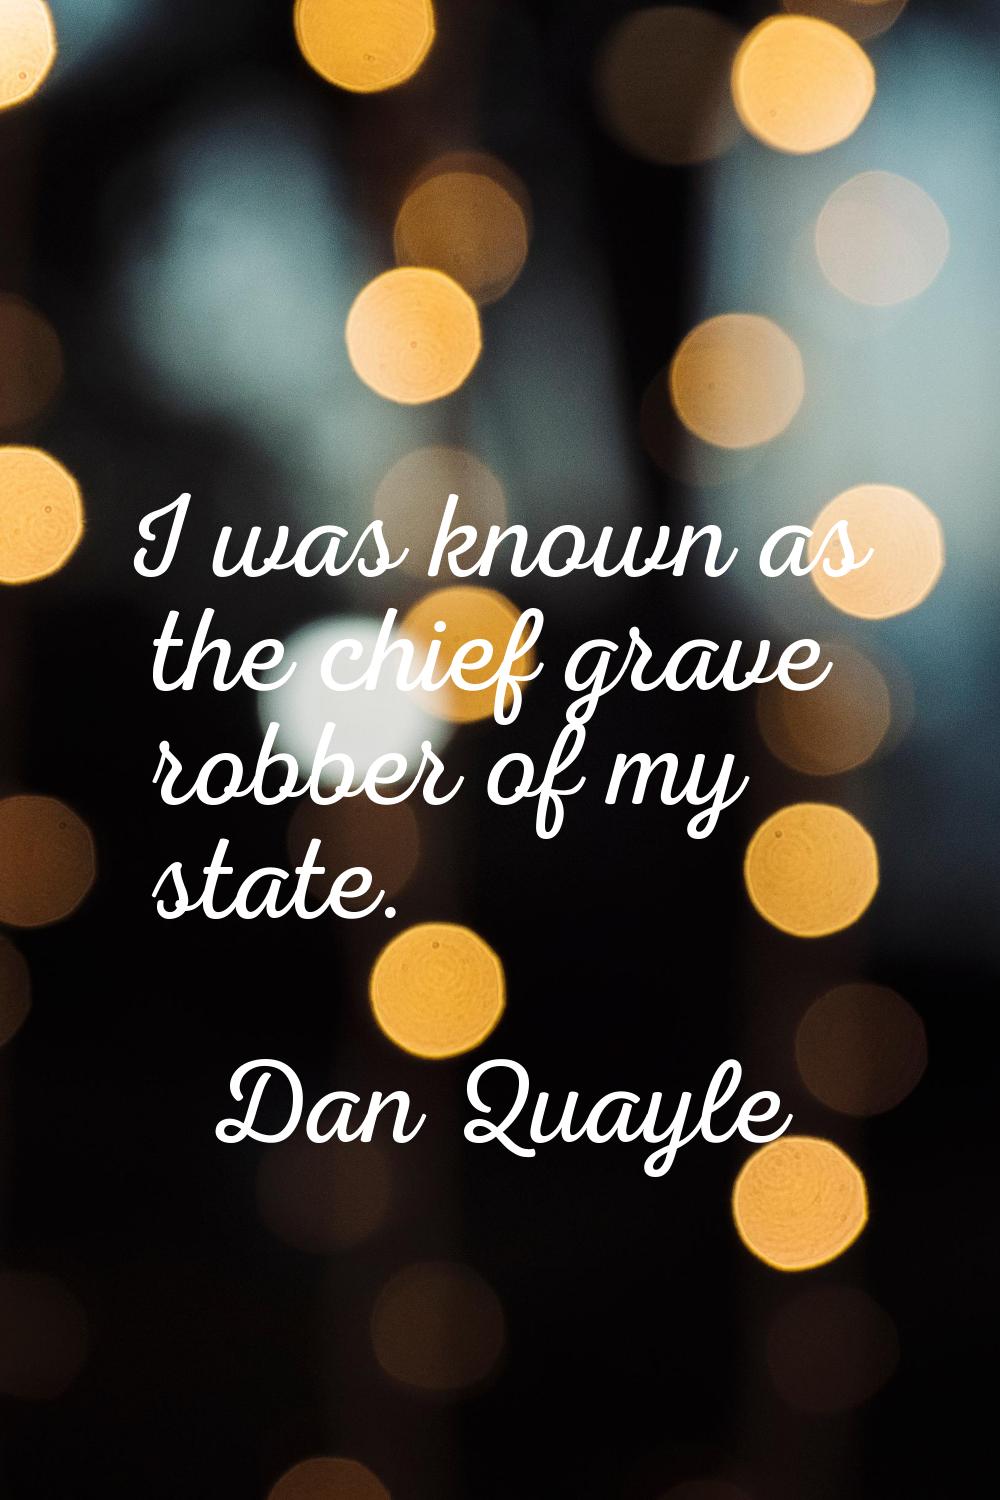 I was known as the chief grave robber of my state.